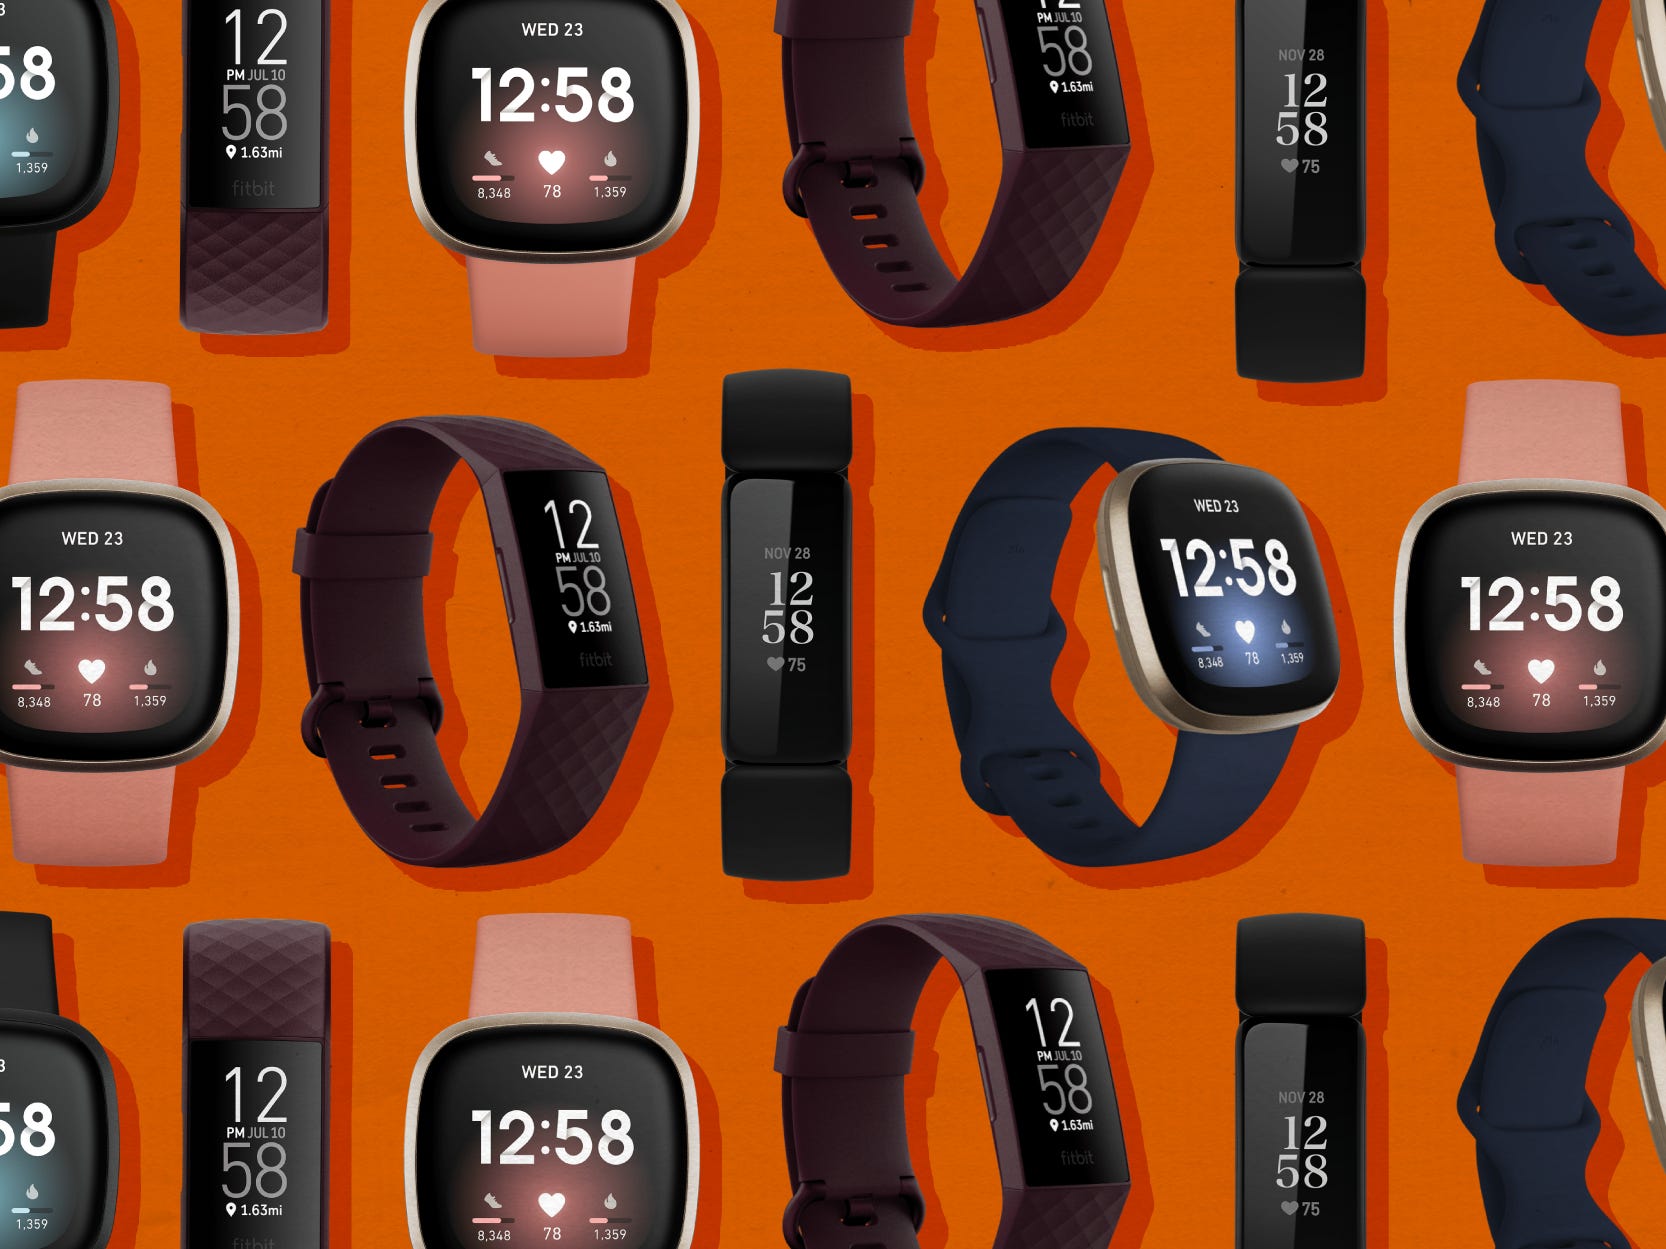 Several FitBits on Orange Background - FitBit Deals Amazon Prime Day 2021